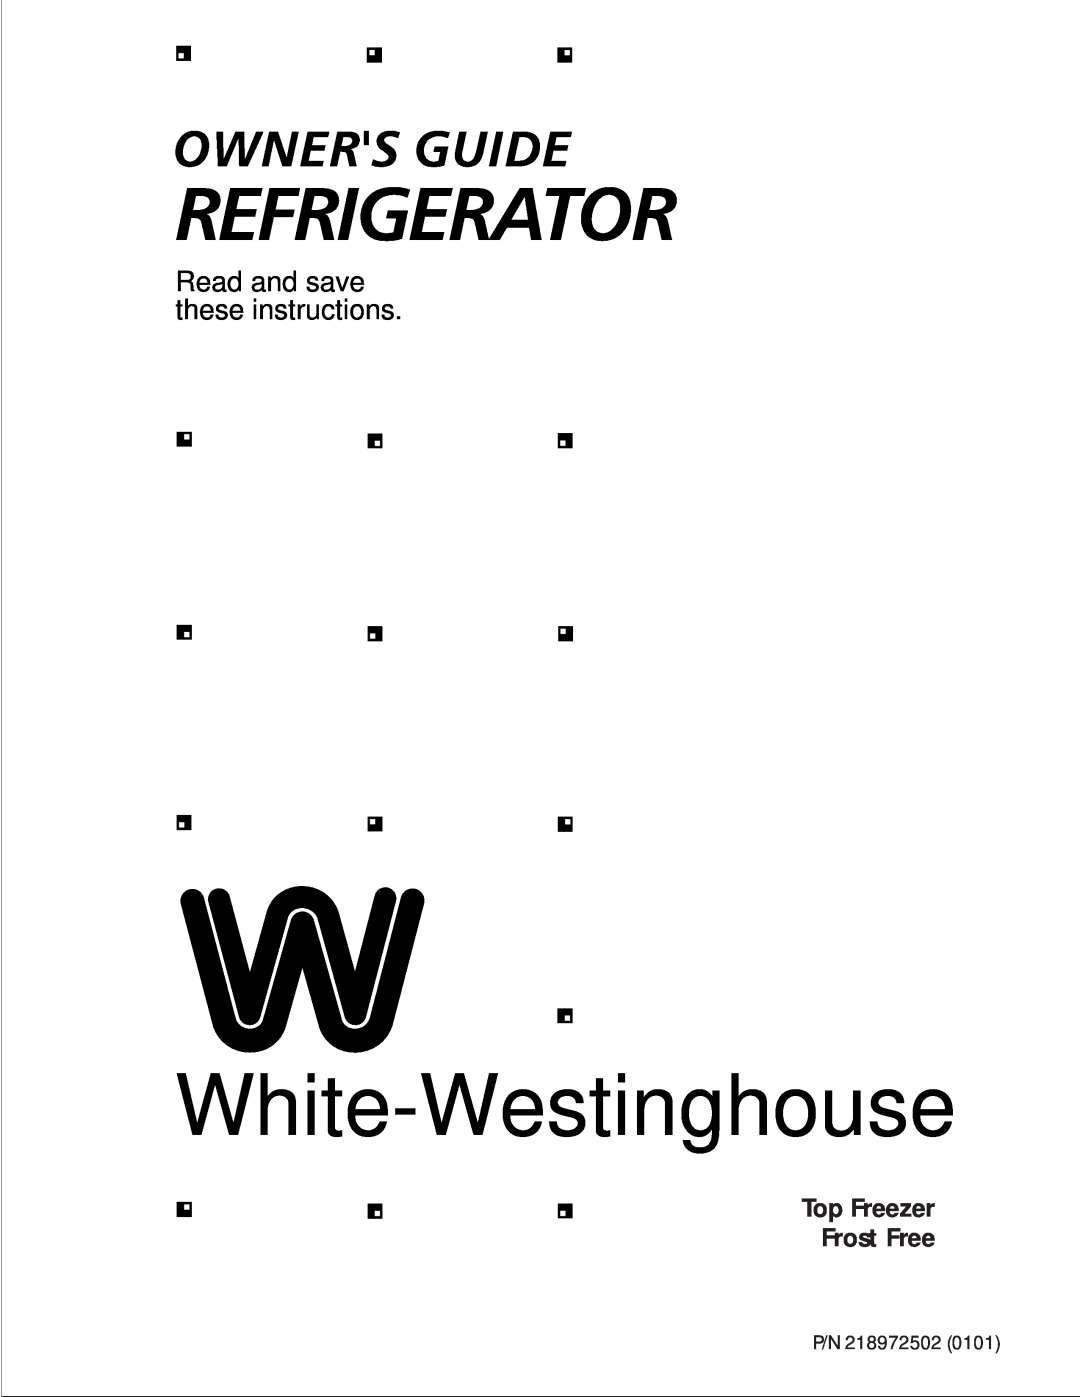 White-Westinghouse manual White-Westinghouse, Read and save these instructions, Top Freezer Frost Free, P/N 